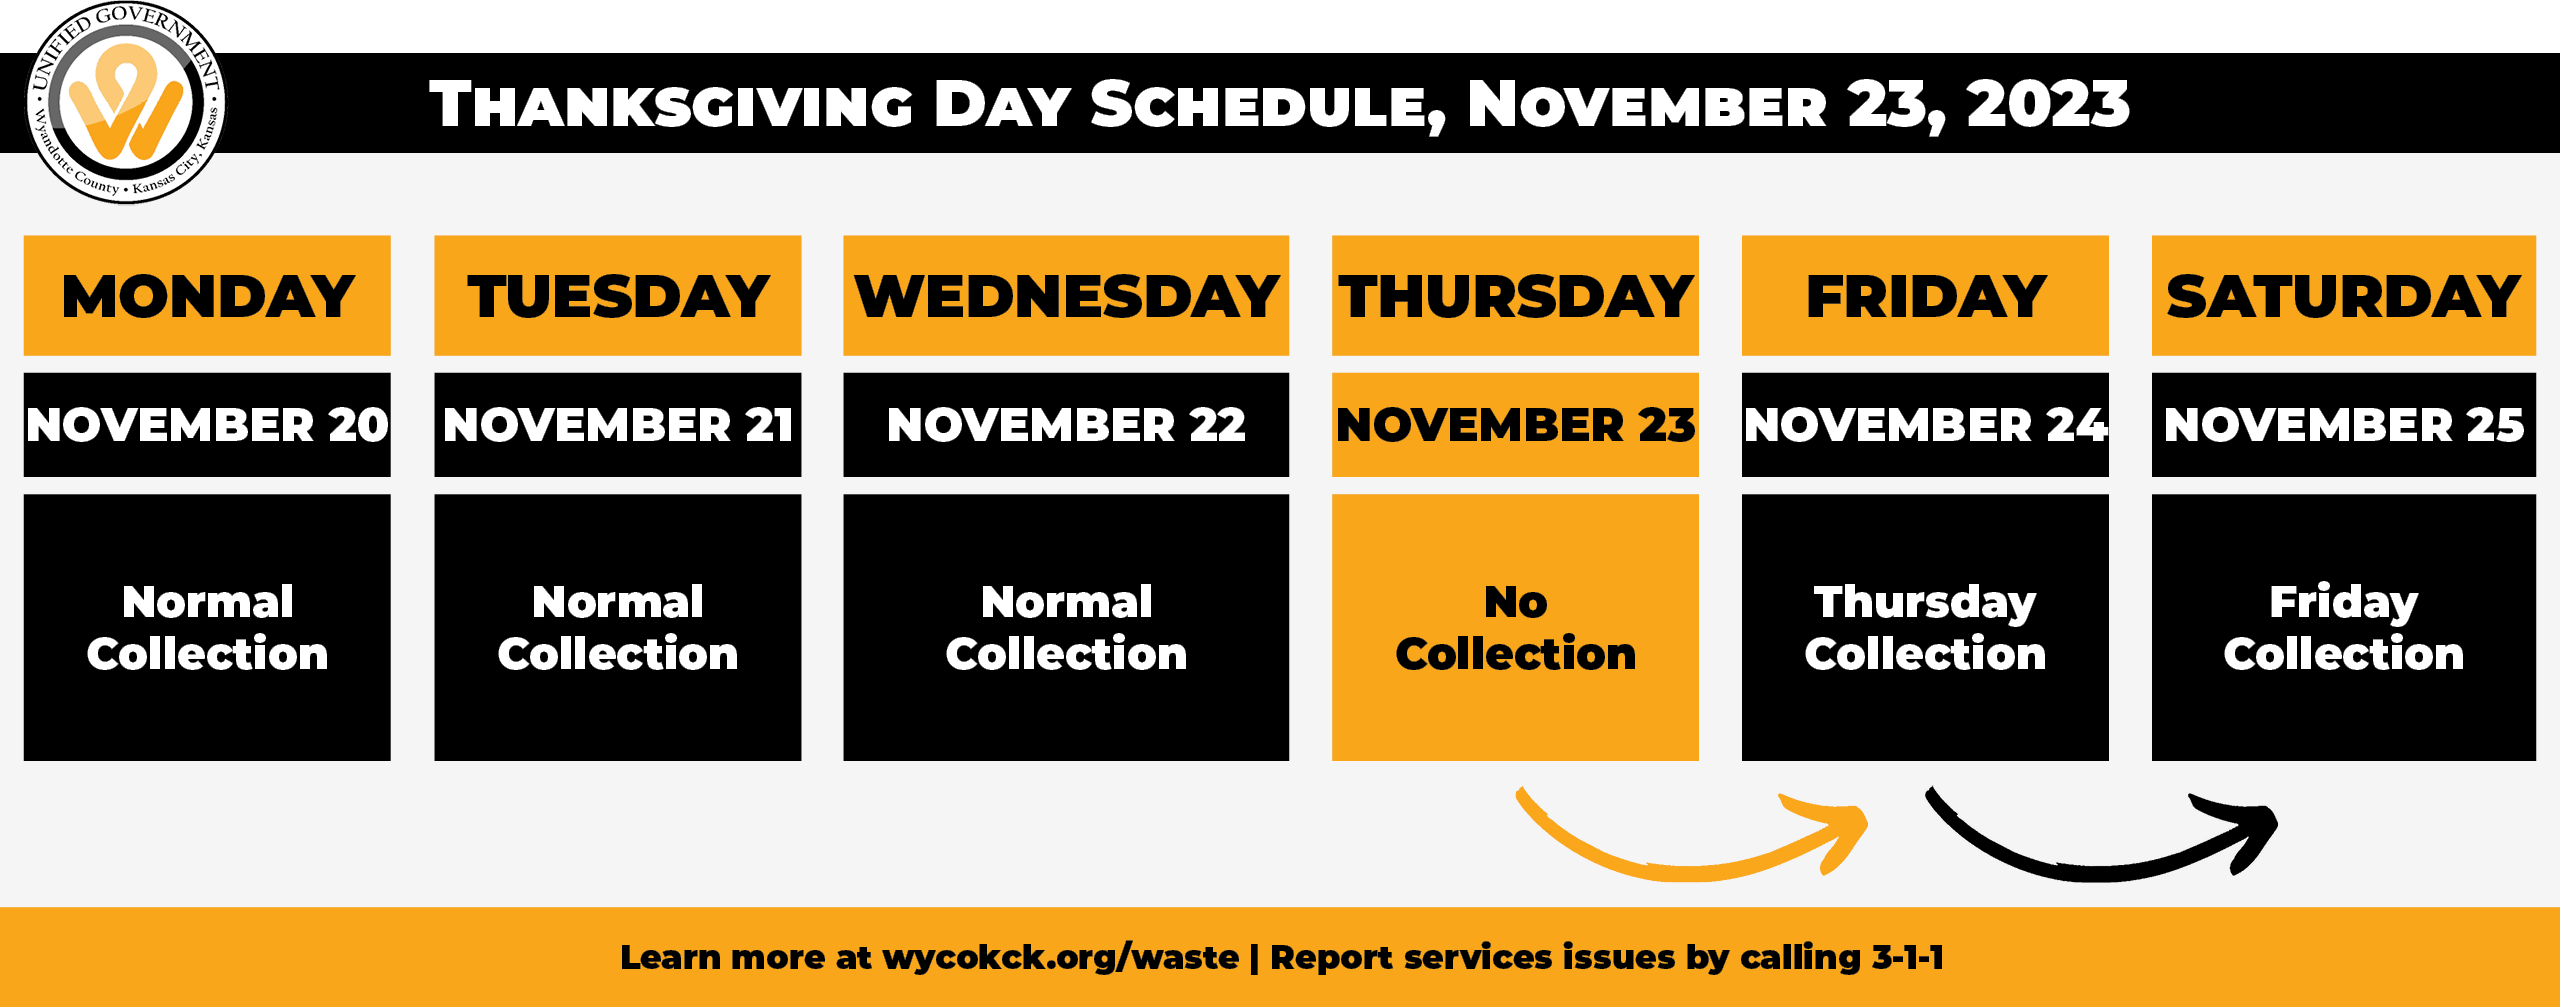 A graphic showing the residential trash and recycling collection schedule for Thanksgiving 2023